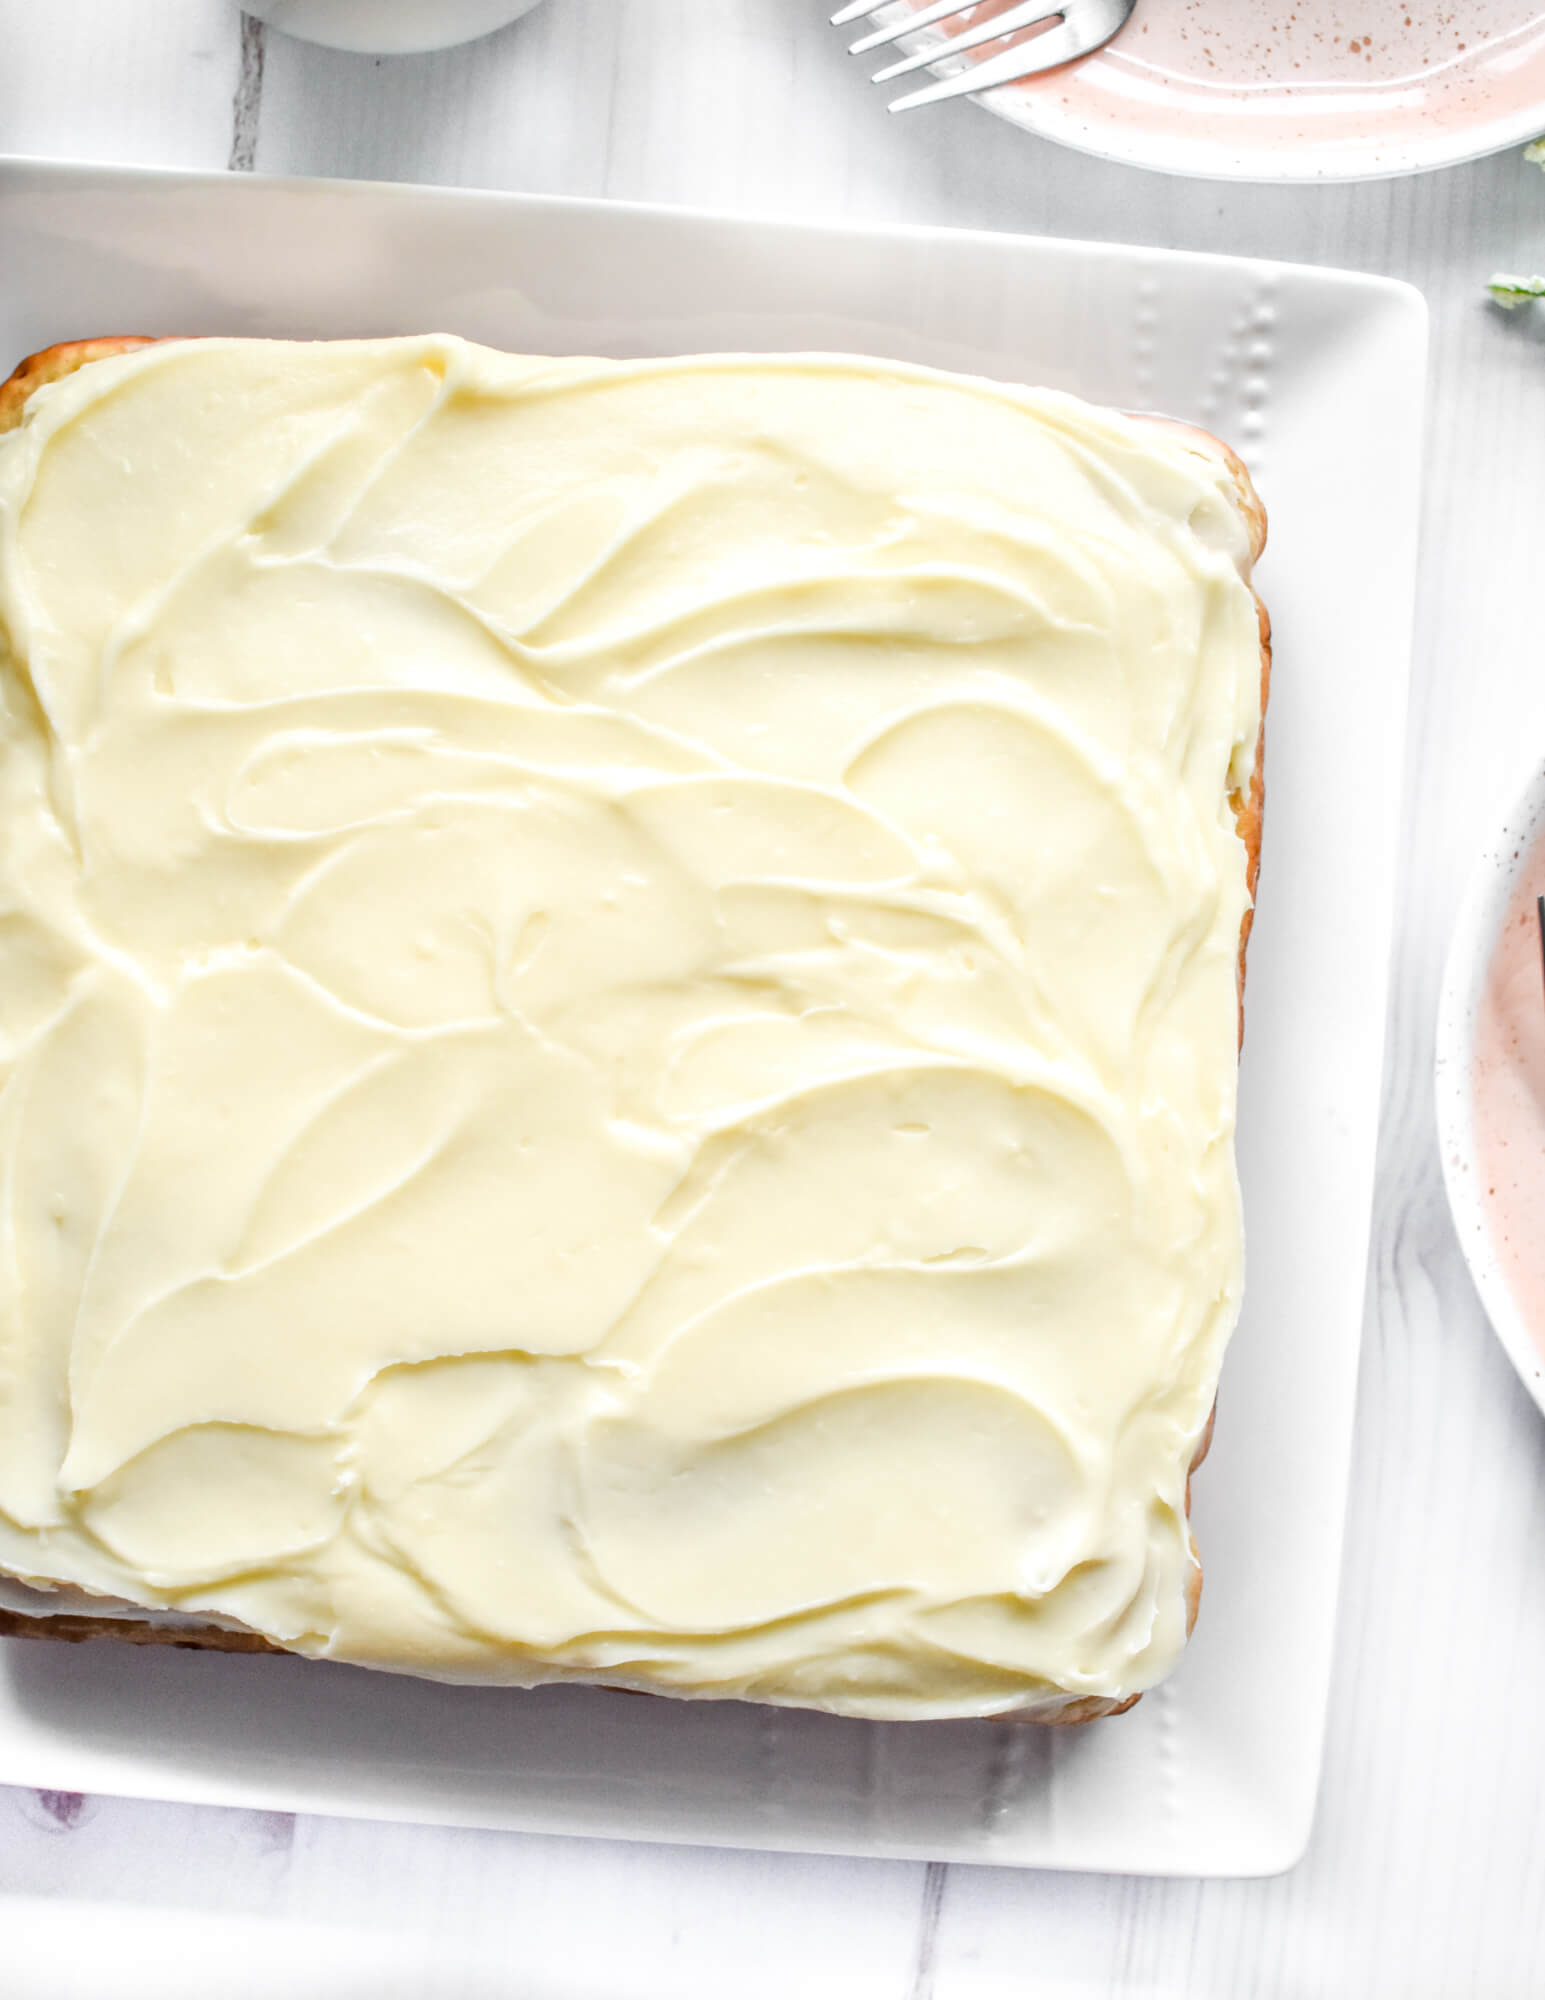 Closeup of a square shaped banana cake with cream cheese frosting.